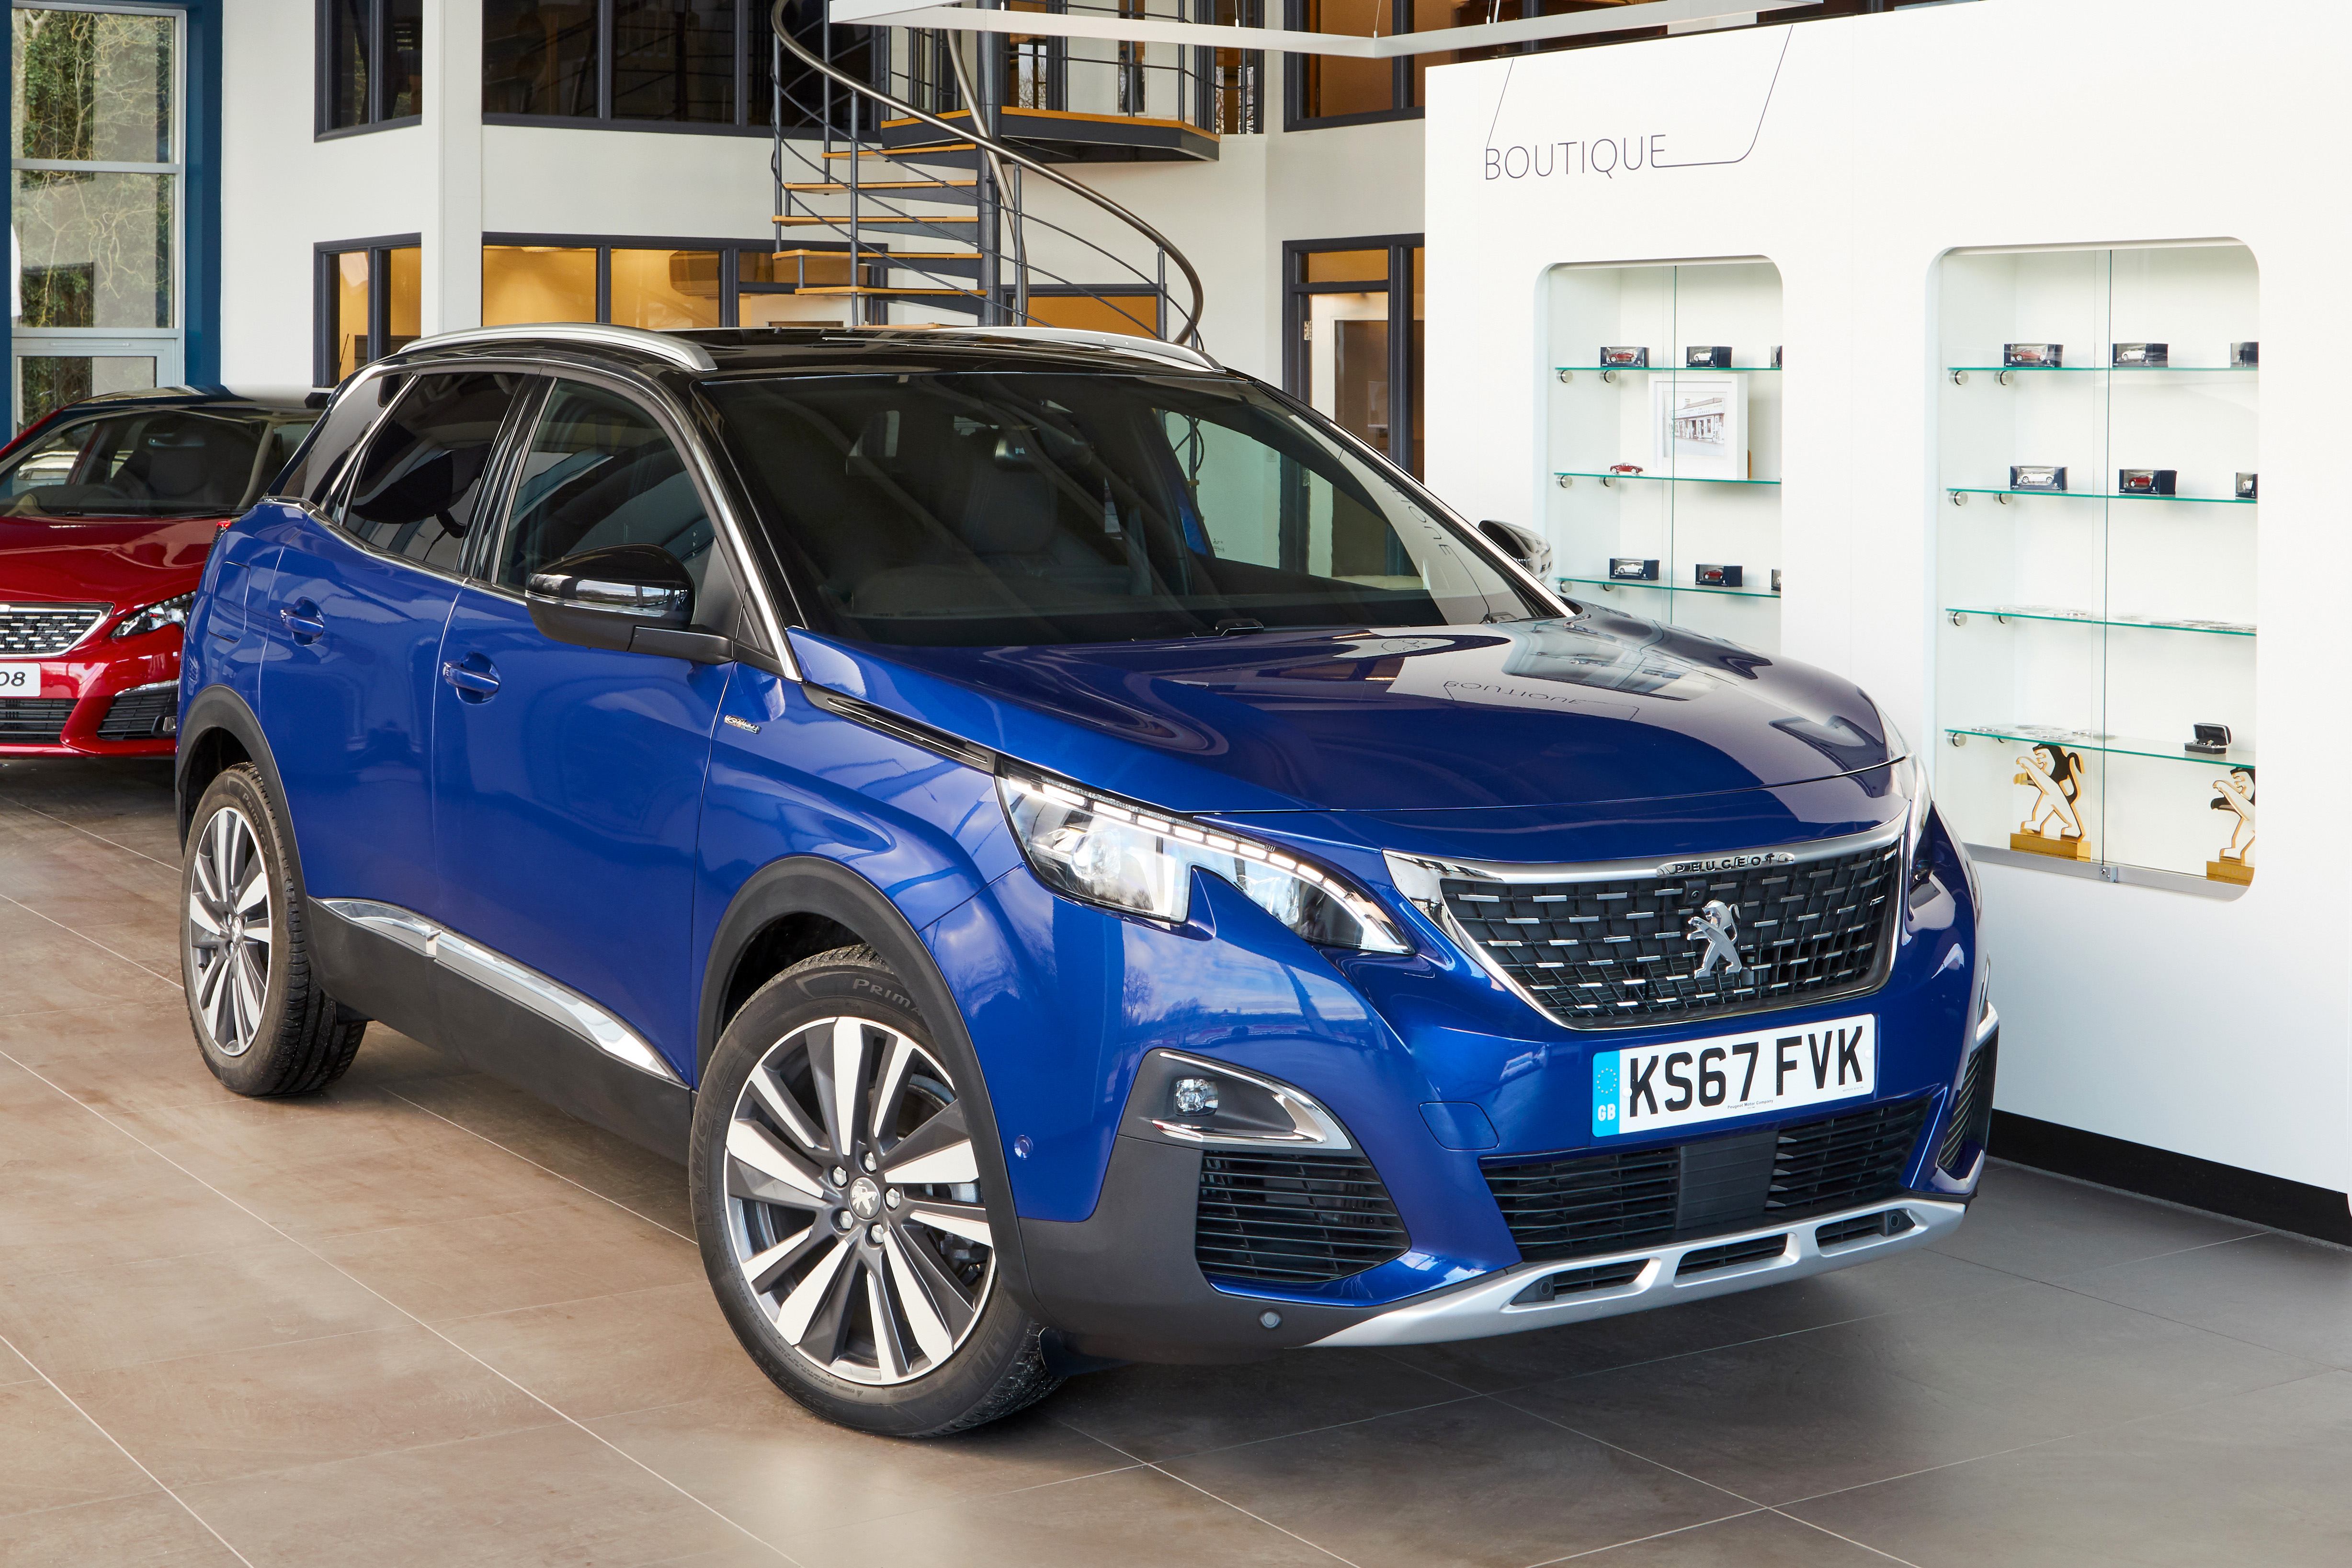 Large -14205-Peugeot Makes Luxury Affordable On 3008And All -New 5008Suvs (1)